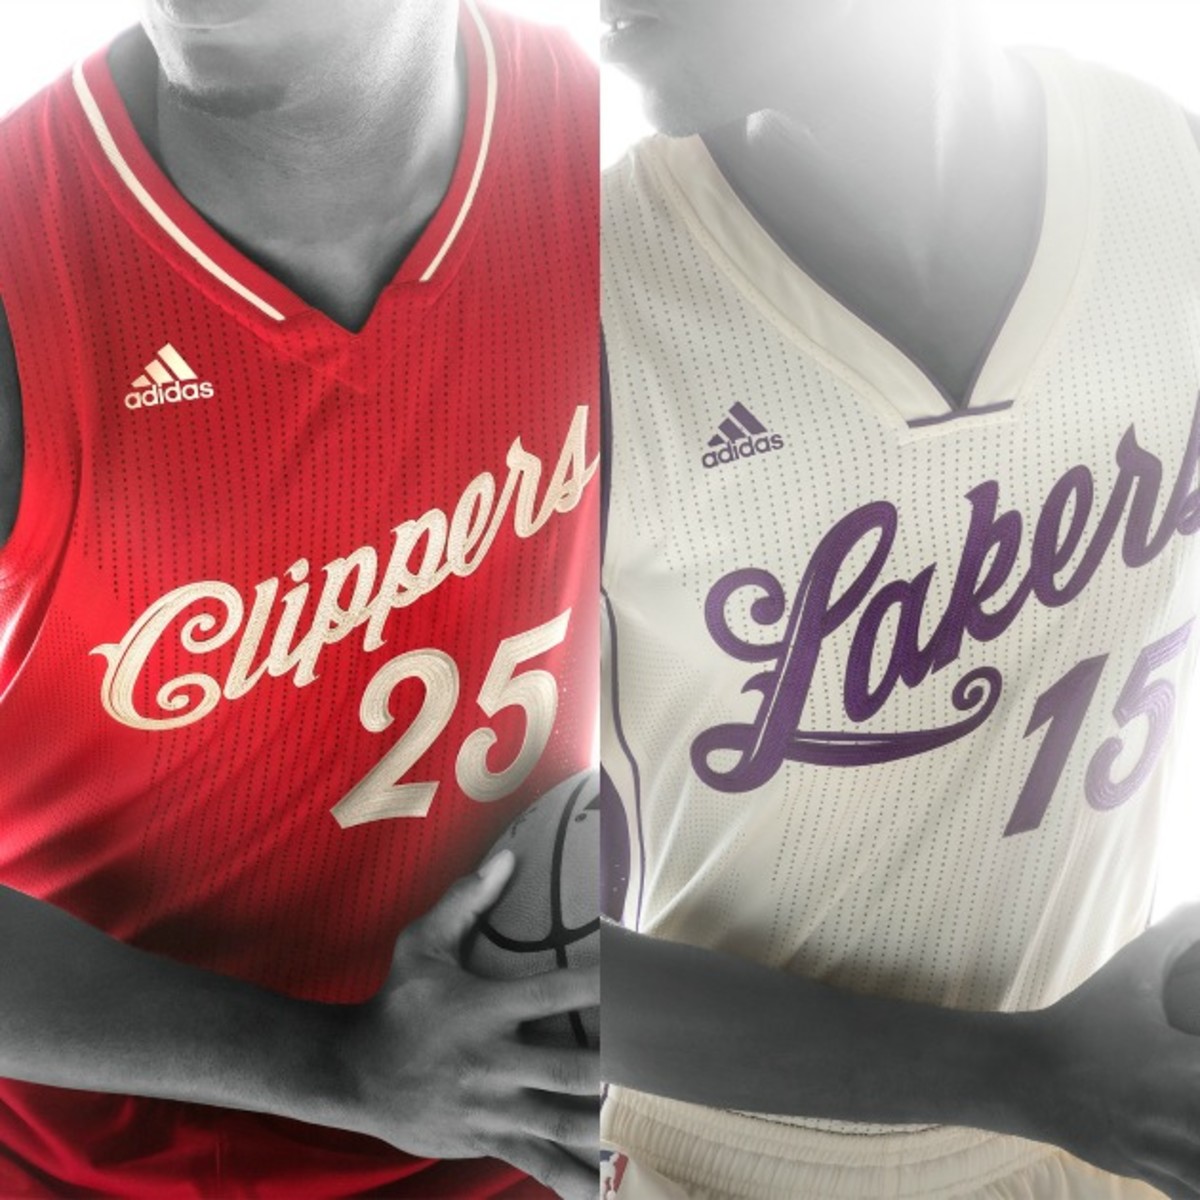 NBA unveils 2015 Christmas Day jerseys and socks - Sports Illustrated